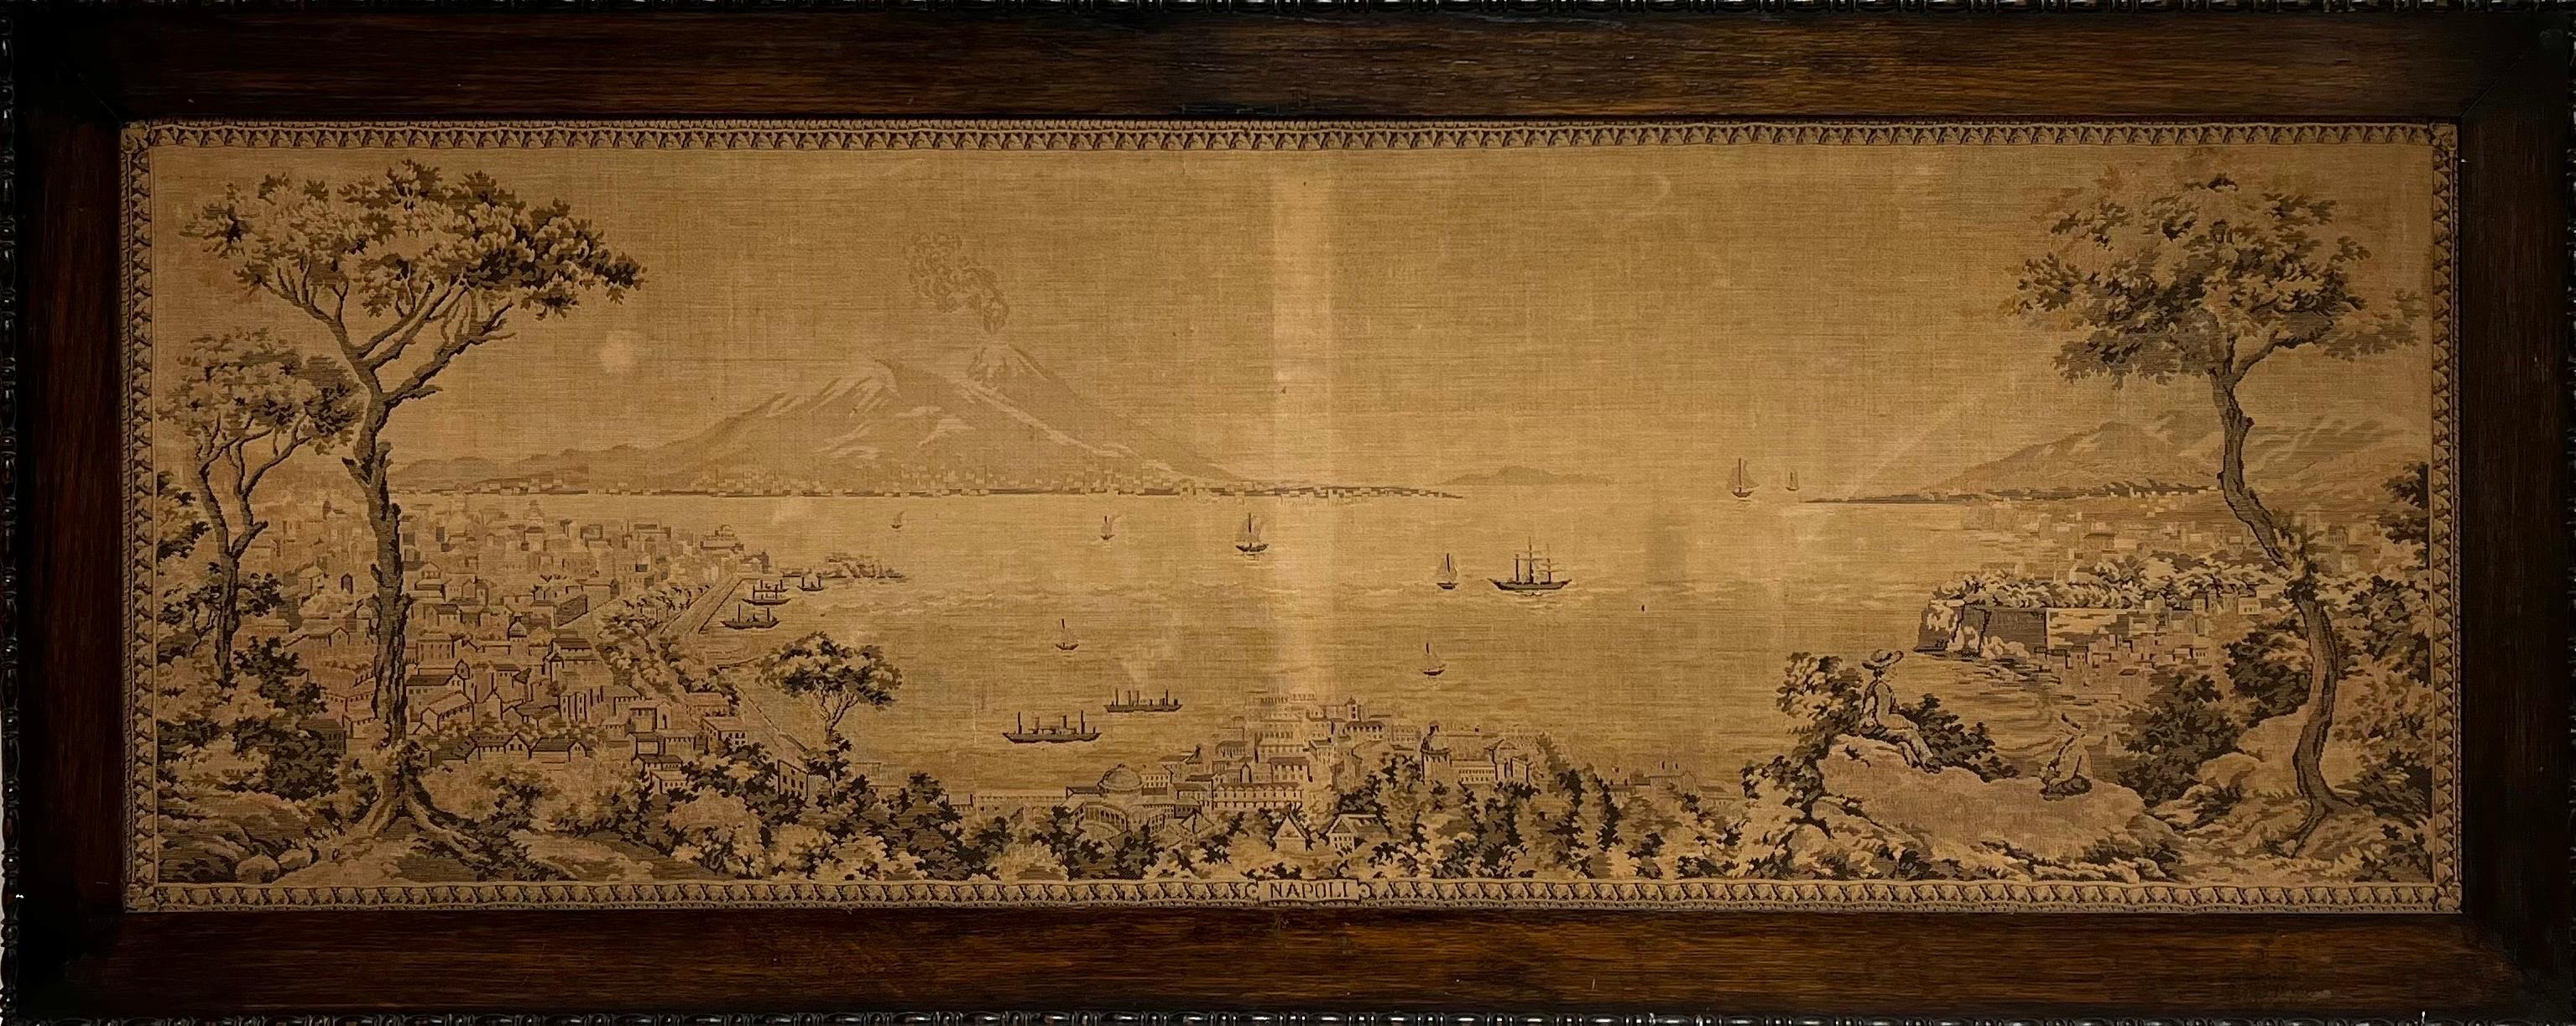 Italian Tapestry Landscape Painting - Very Large Vintage Tapestry Woolwork Naples with Mount Vesuvius